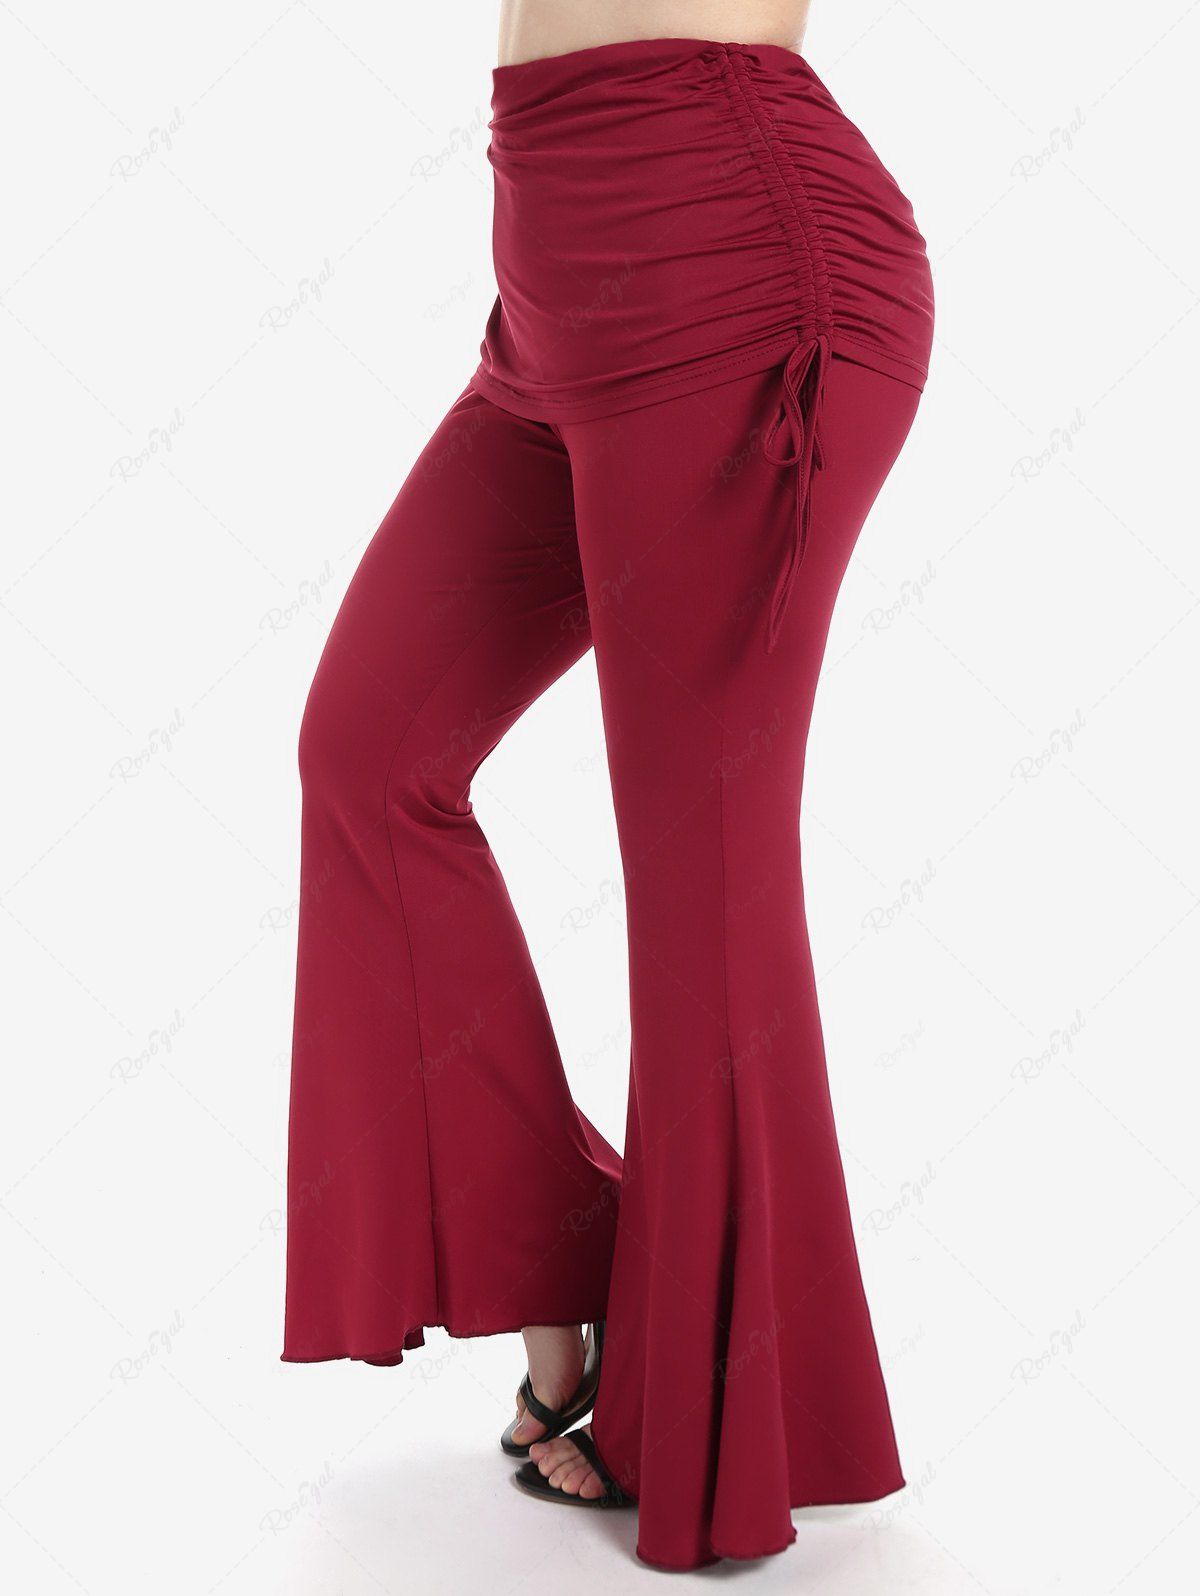 Fancy Plus Size High Waist Cinched Skirted Bell Bottom Pants  